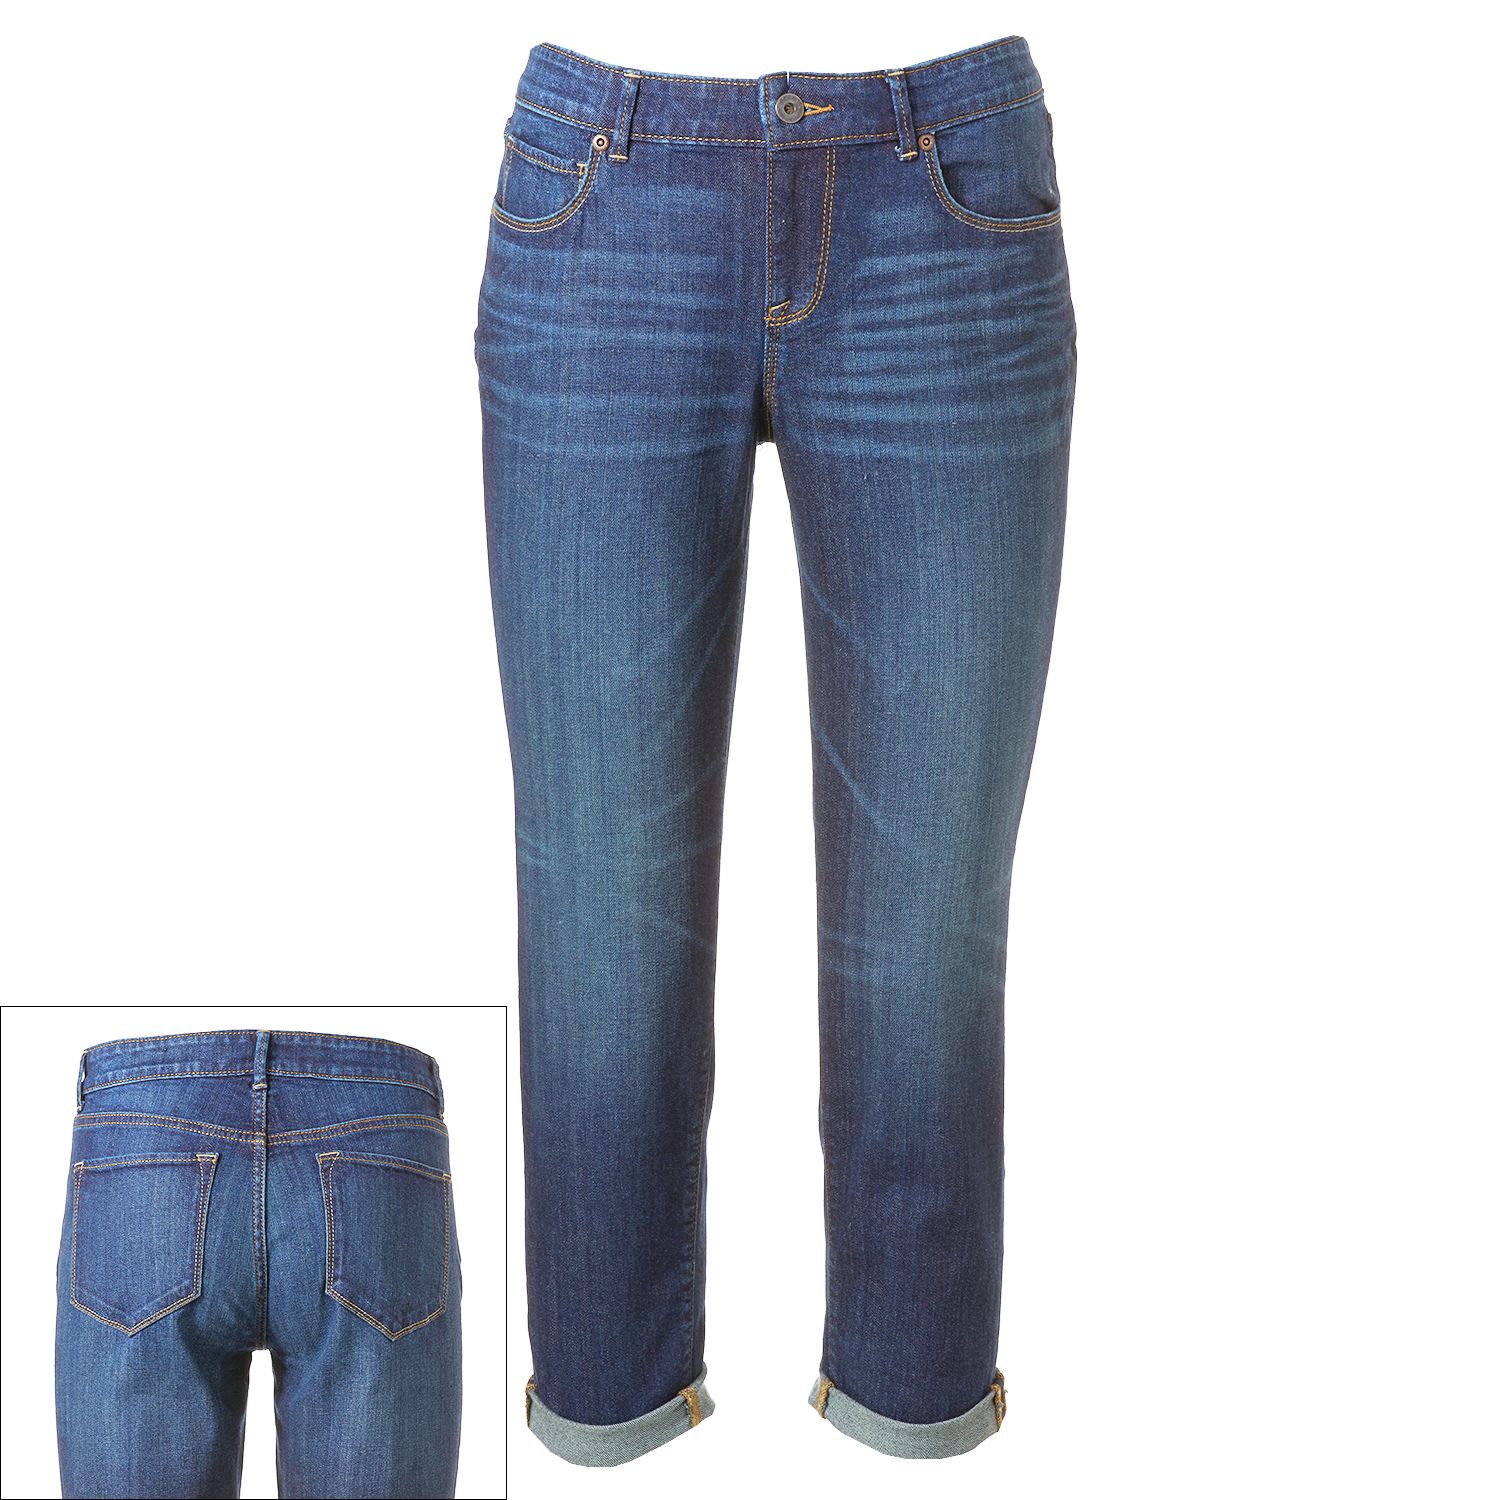 sonoma life style jeans